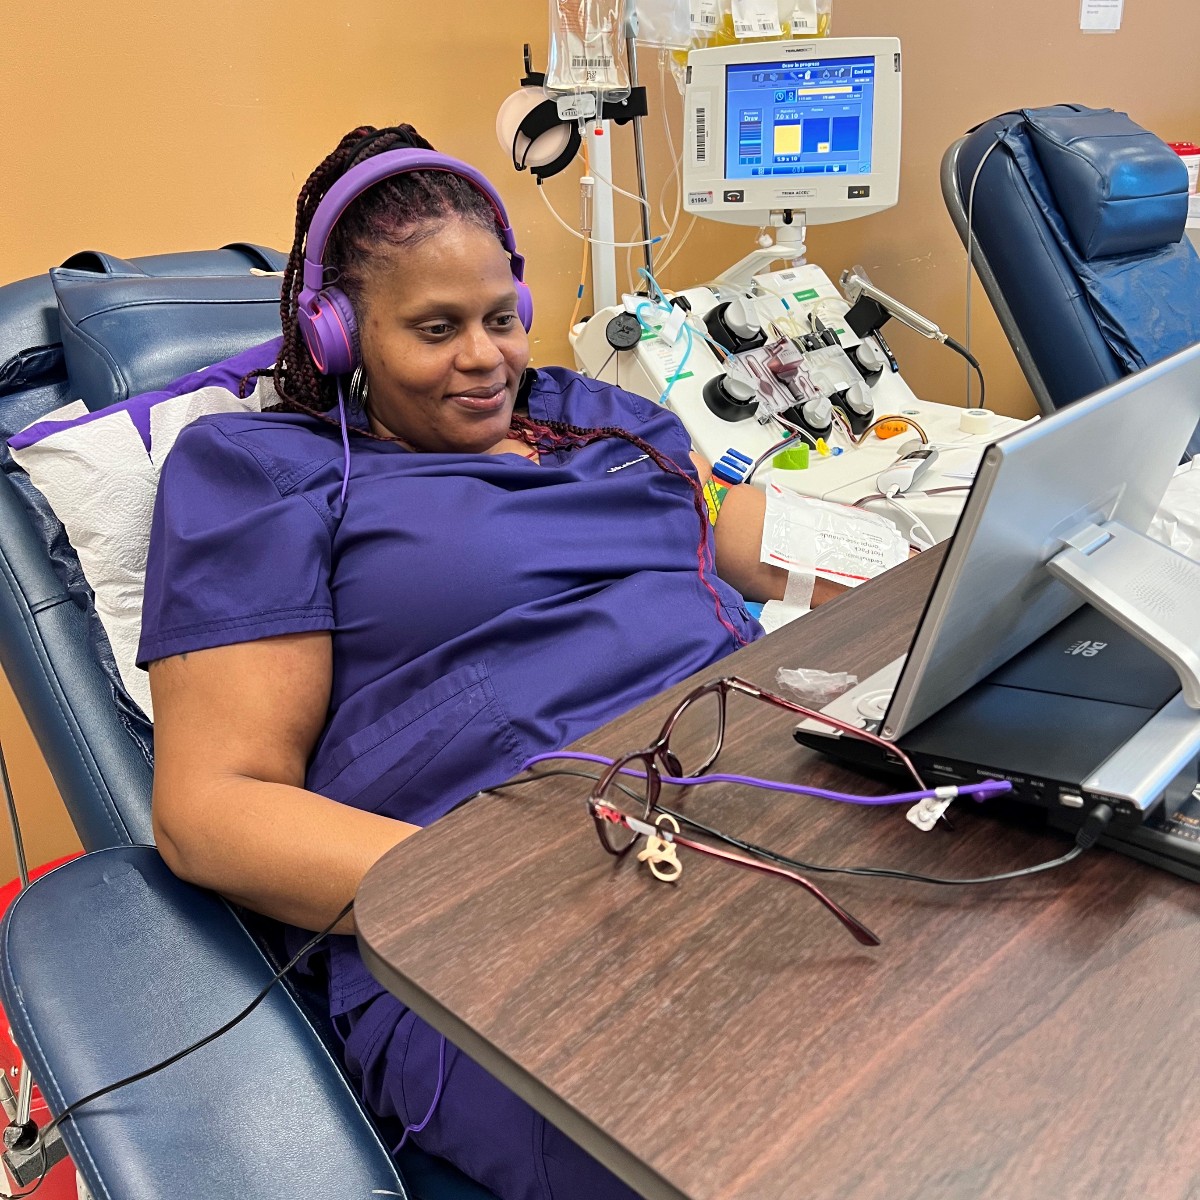 In a quiet corner, there's a platelet donor making a difference. Adrienne is a mobile phlebotomist and donated platelets for the first time because she knew there was a need. Join Adrienne and give thanks for your good health with a blood donation. vitalant.org